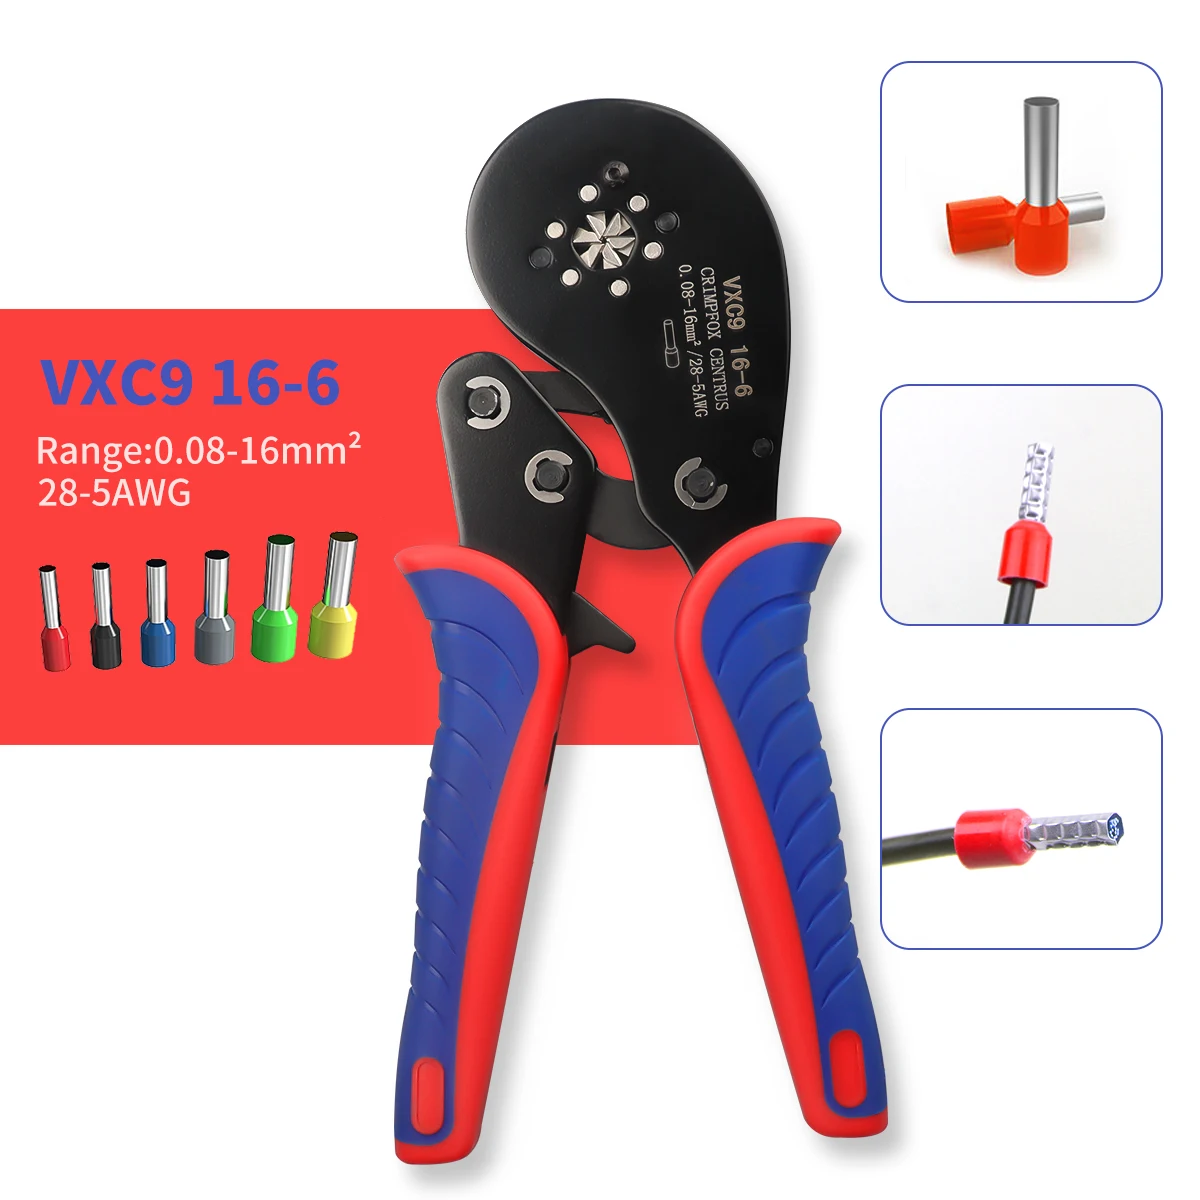 VXC9 16-6 Serrated Self-Adjusting Ratchet Crimping Tool, Used for Ferrule Crimping Tool with Wire Gauge of 0.08 -16mm2 28-5AWG